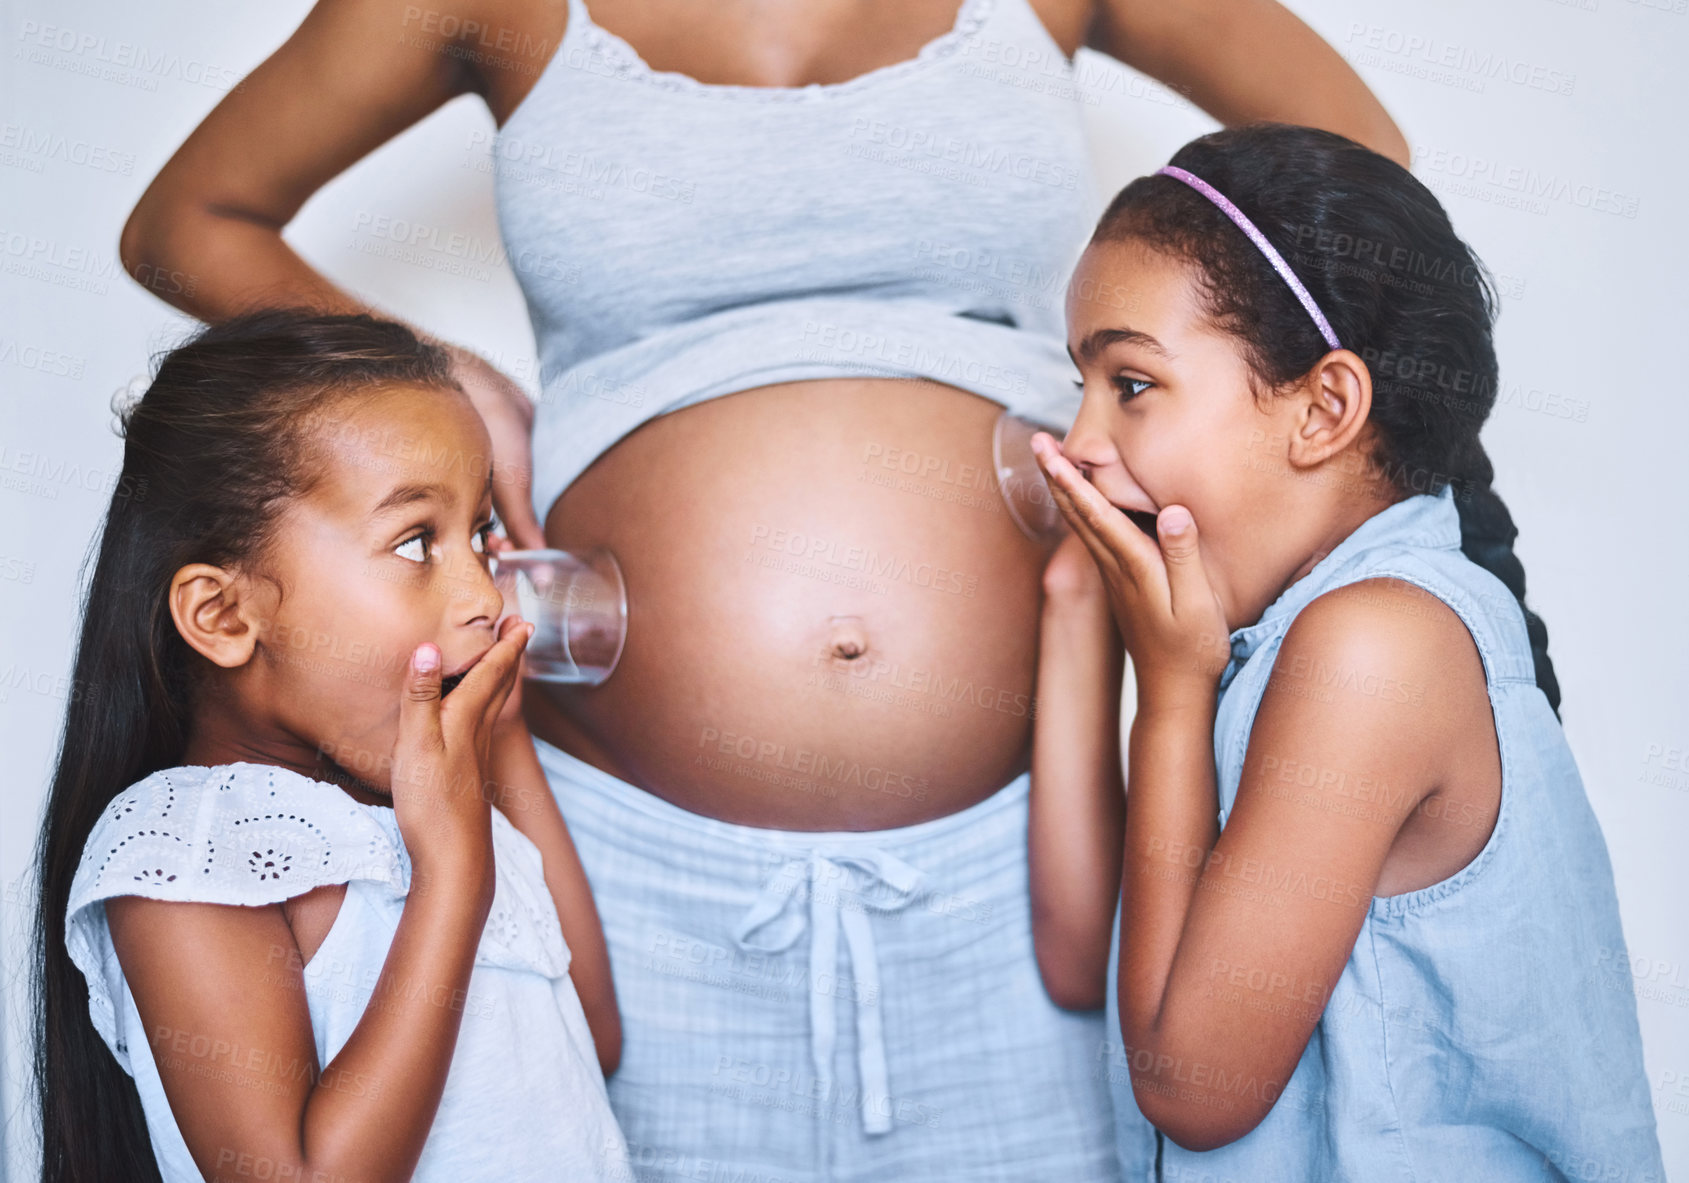 Buy stock photo Shot of two cheerful little girls standing next their mother while each putting a glass on her pregnant belly to listen for movement at home